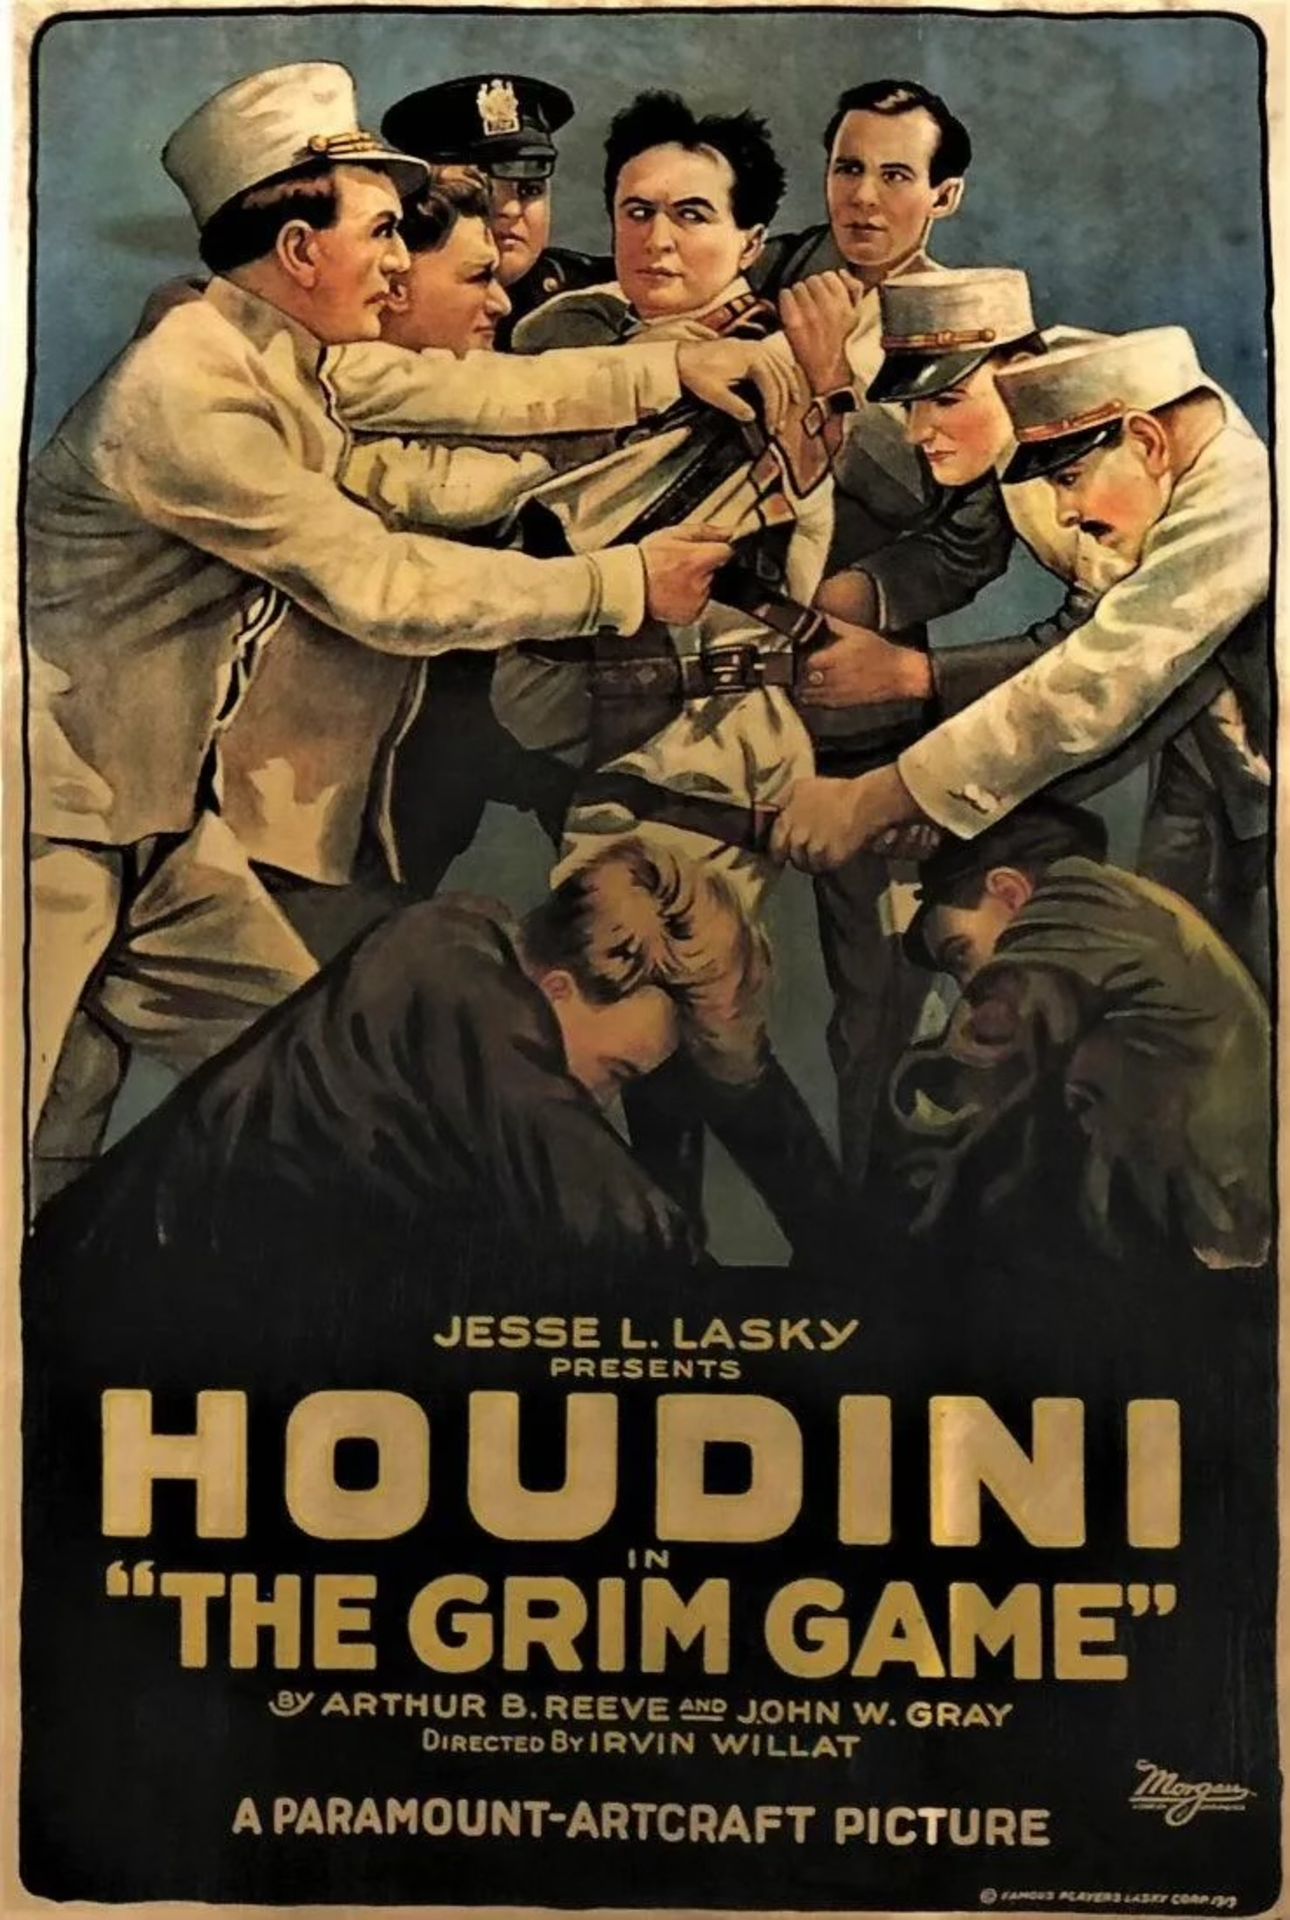 Harry Houdini The Grim Game Movie Poster 41"x27"